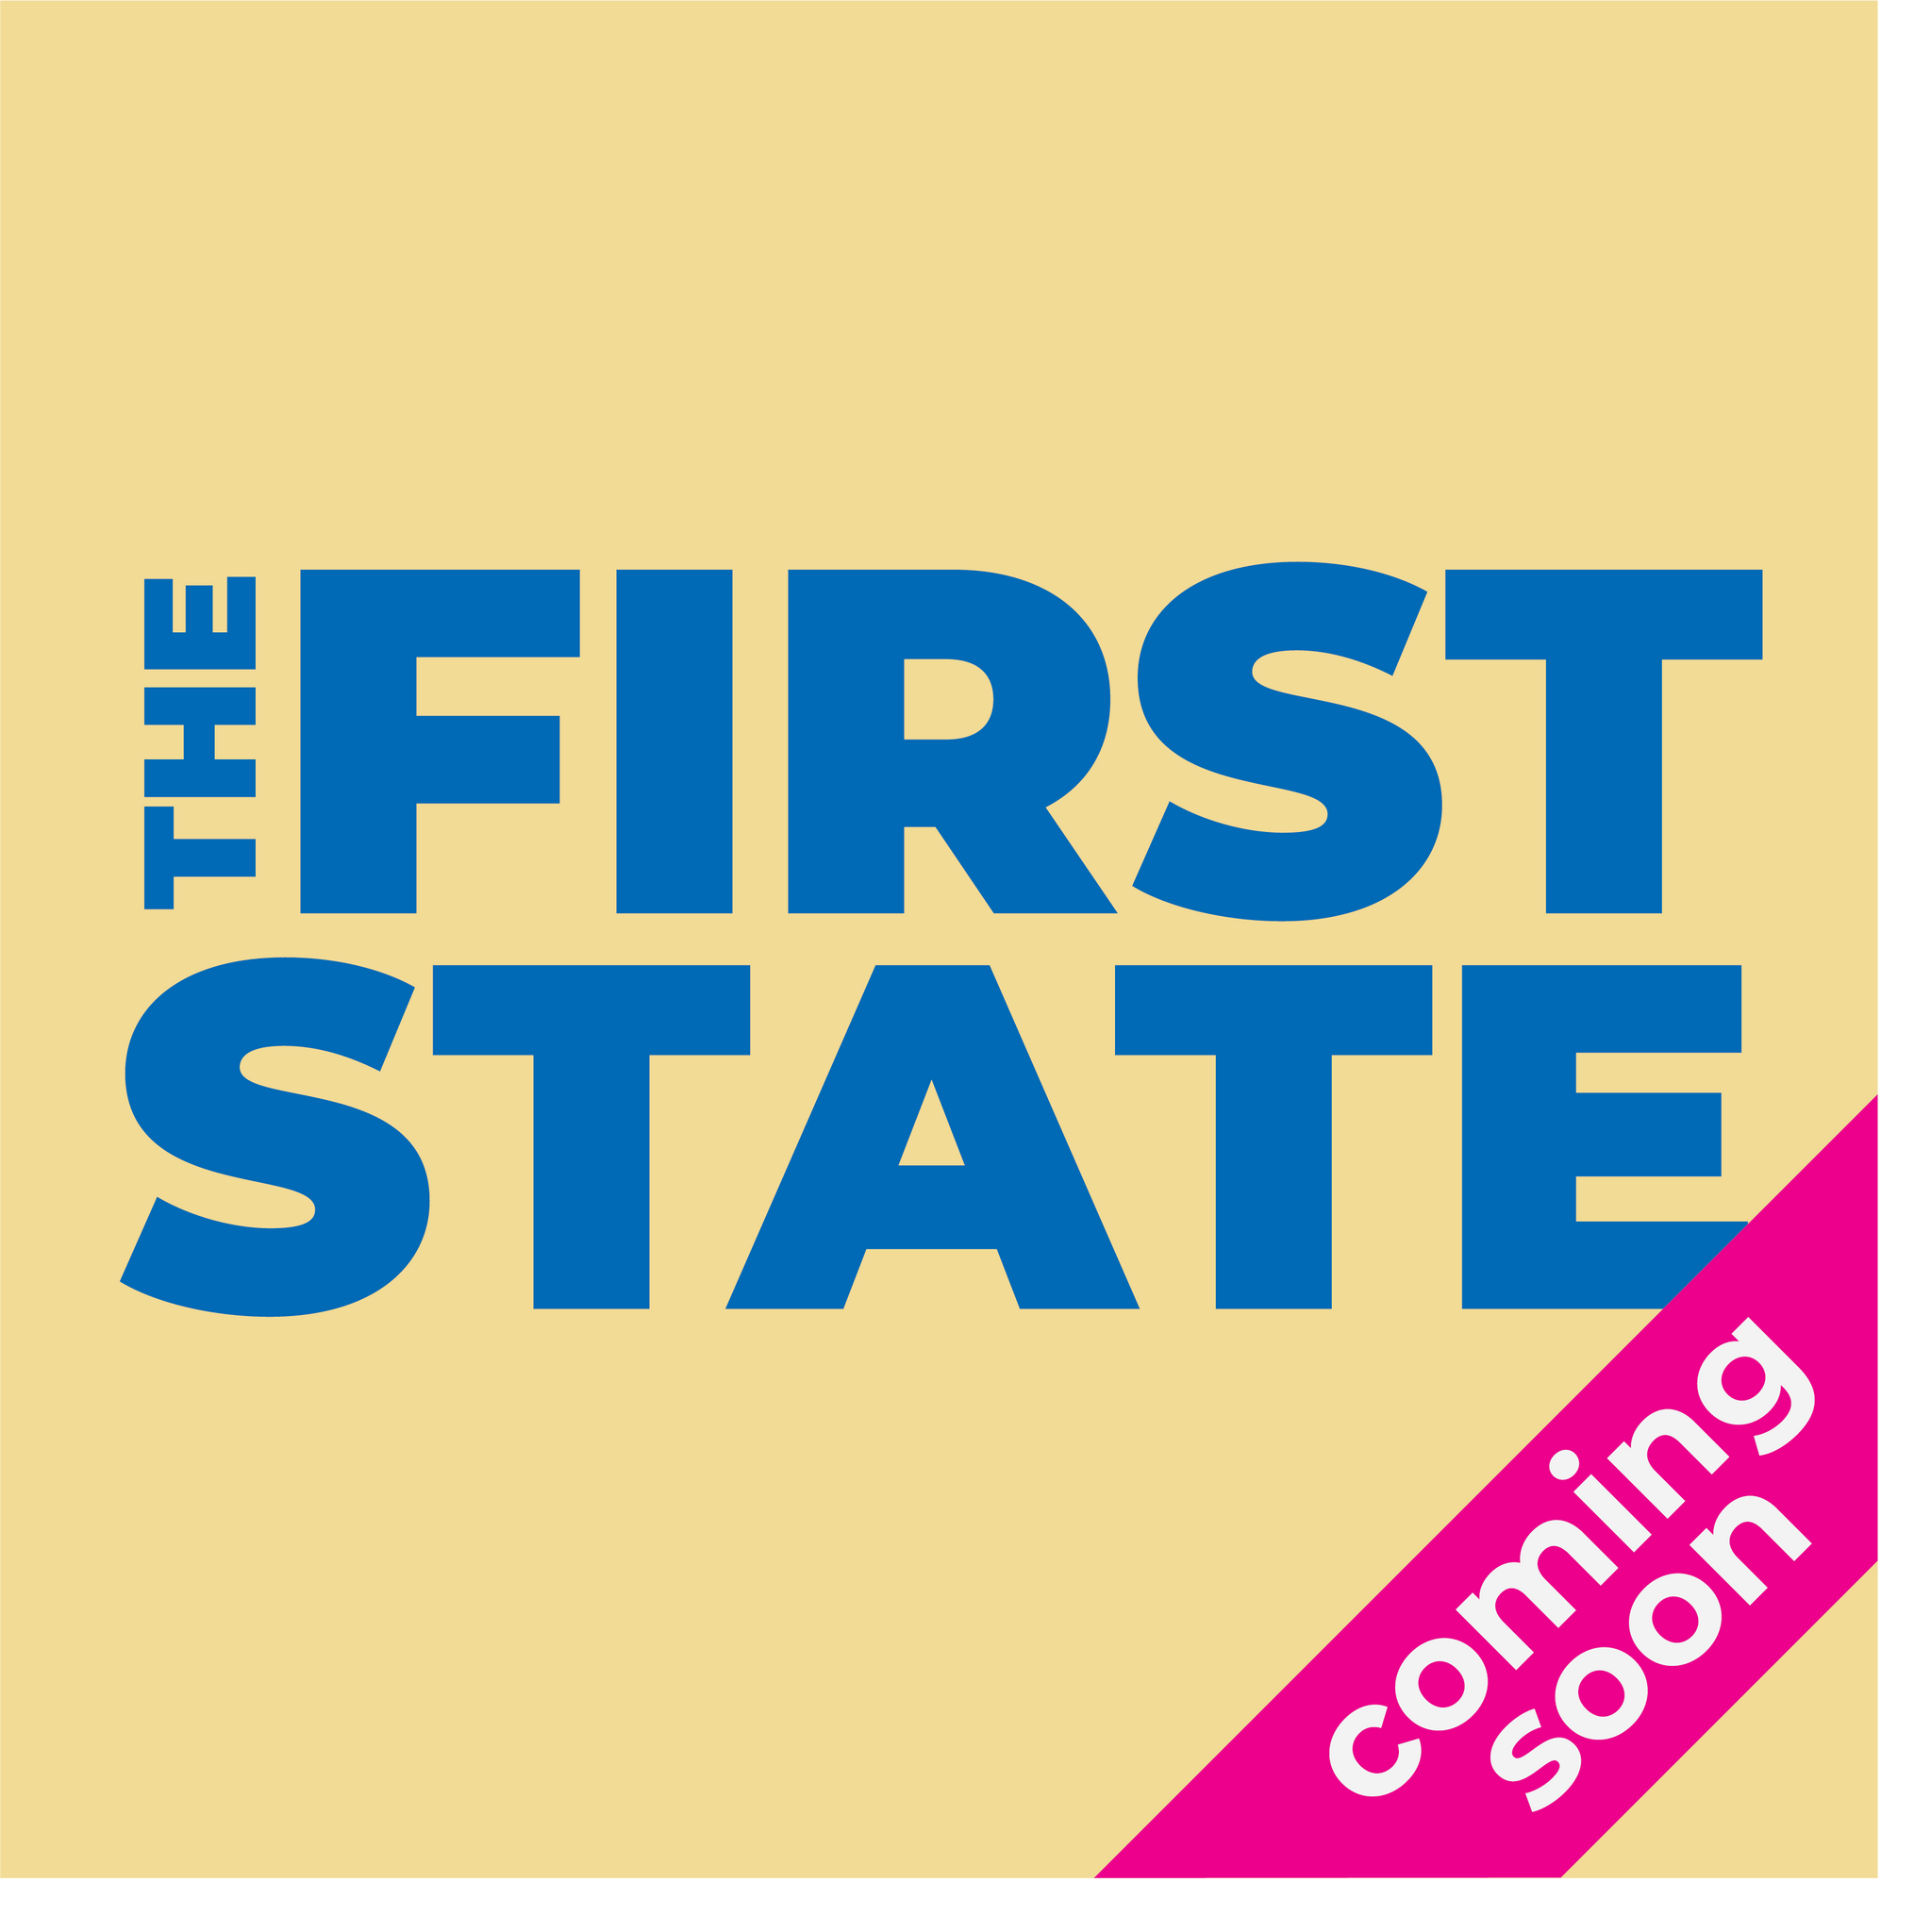 The First State